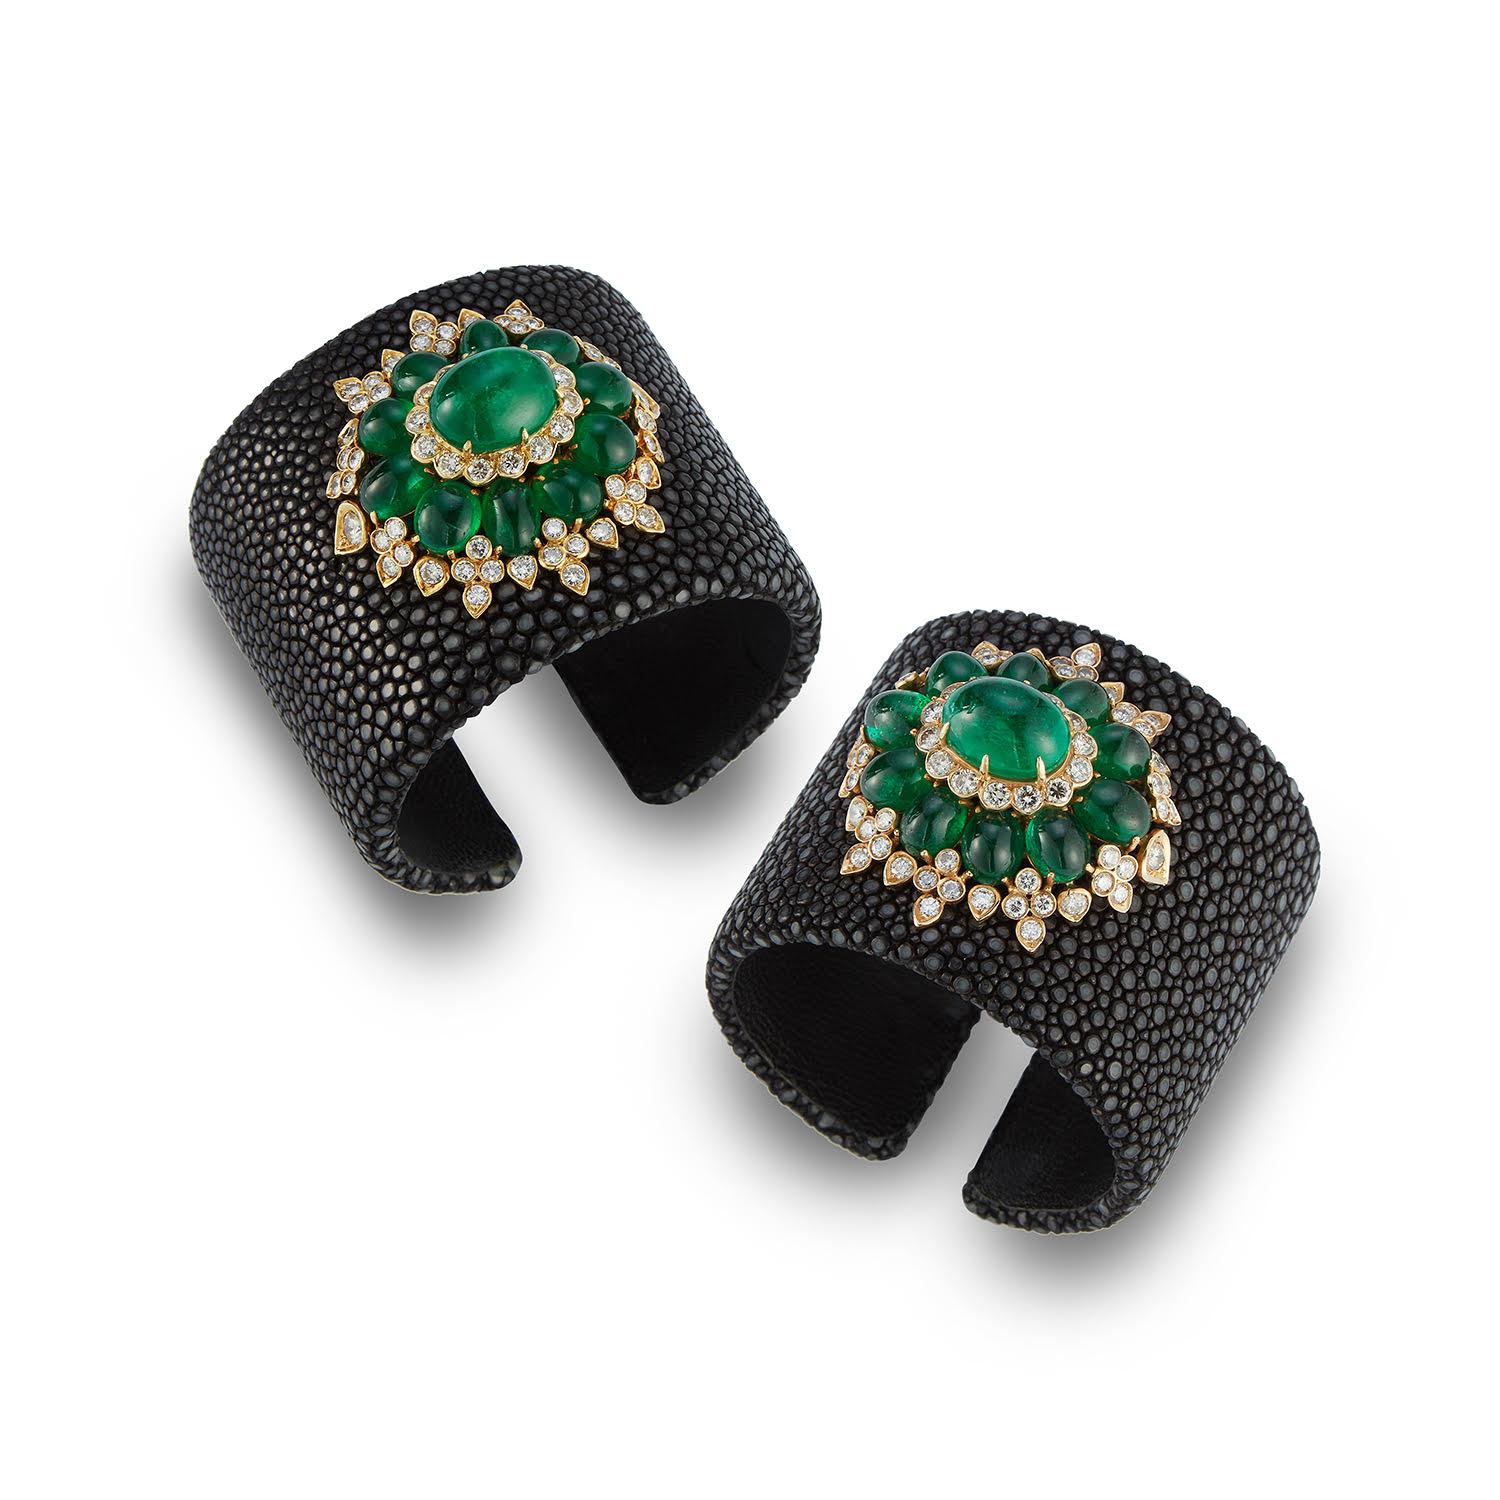 A very stylish pair of cabochon emerald and diamond bangles

Approximately 8 carats of diamonds
Approximately 90 carats of fine gem cabochon emeralds 

Mounted in yellow gold on shagreen